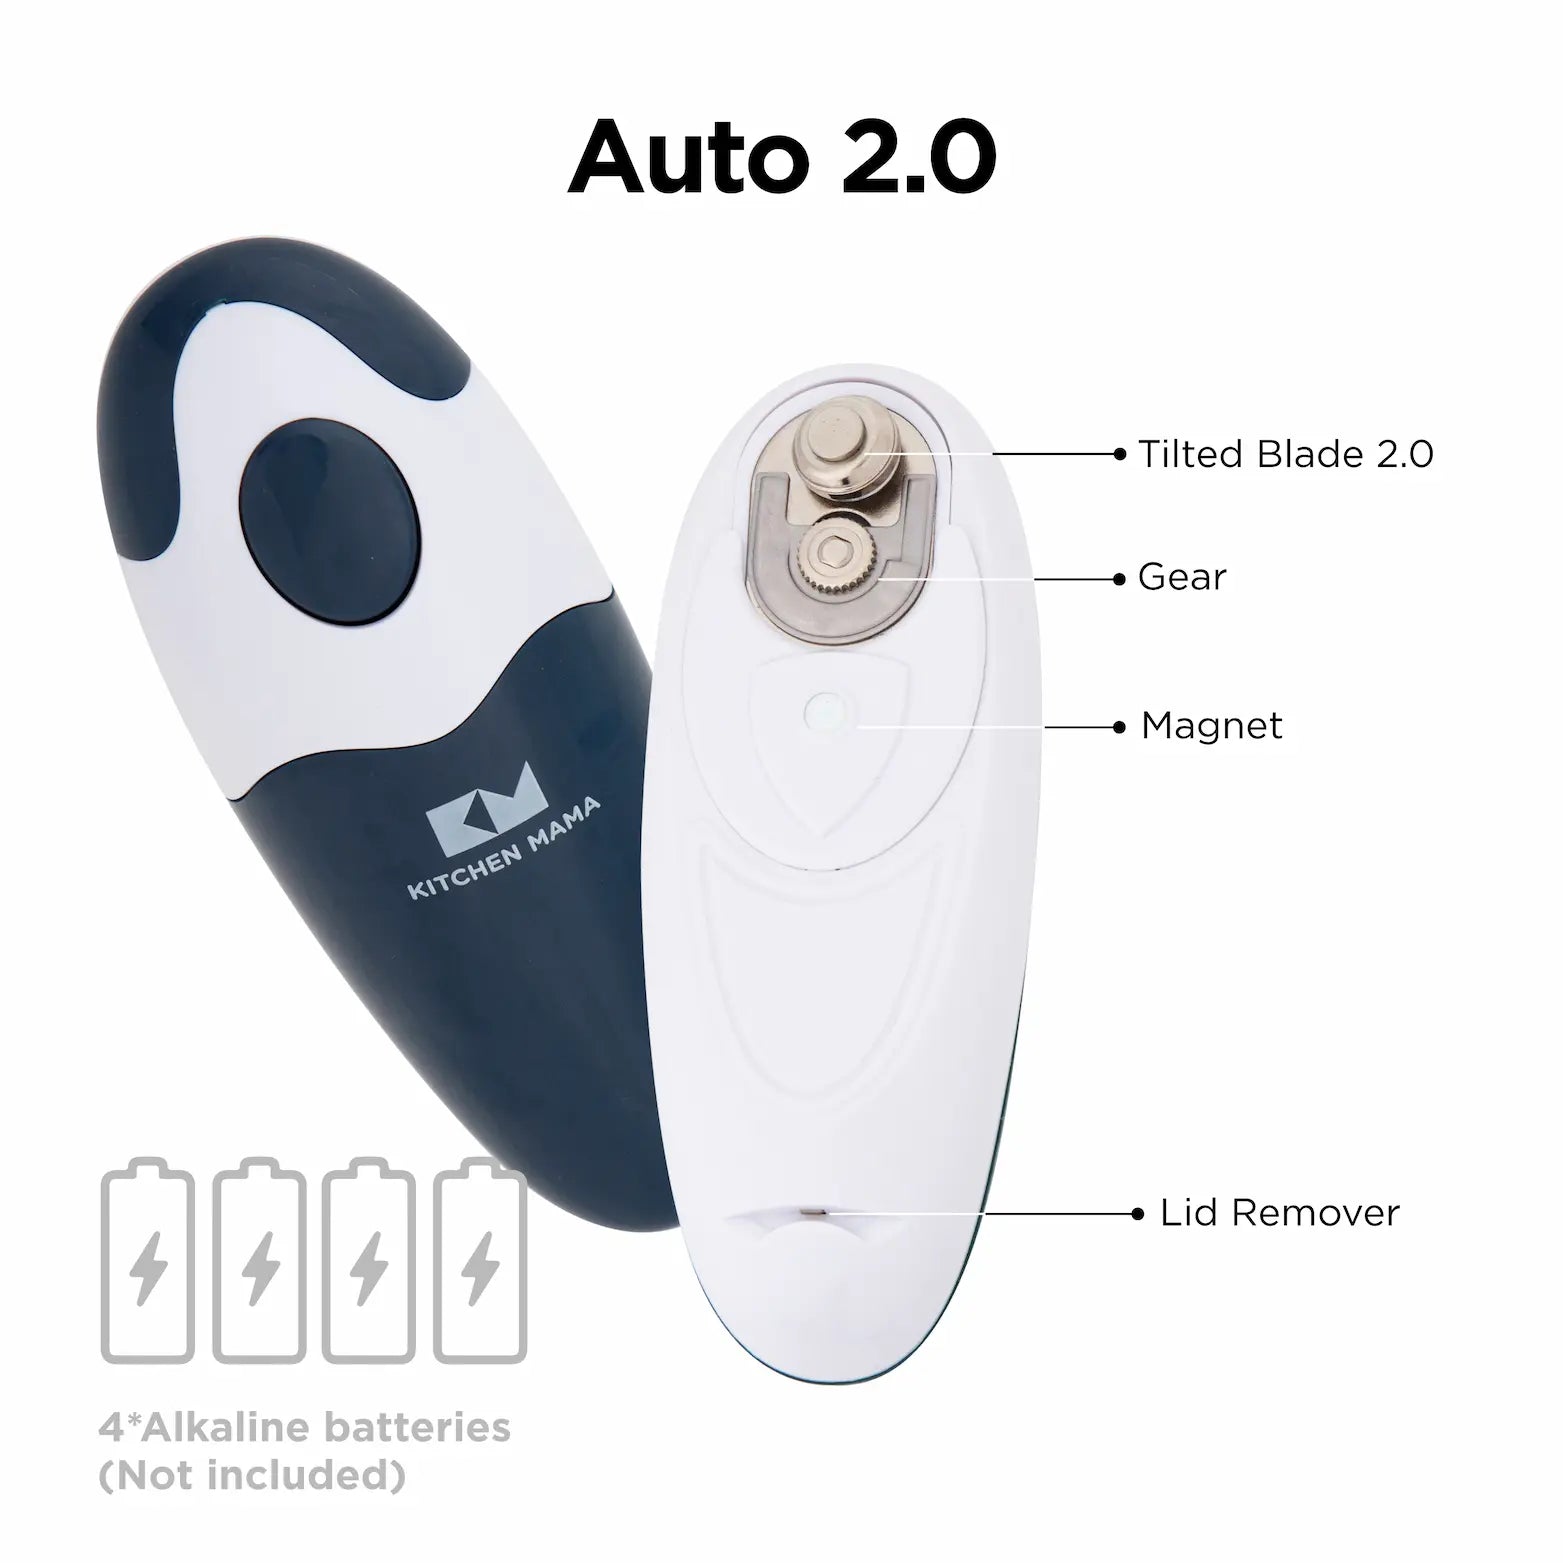 Electric Can Opener - Auto 2.0, Kitchen Mama, Navy Blue, CO1150-N, can opener magnetic, can opener electric kitchen, electric can opener smooth edge, portable can opener